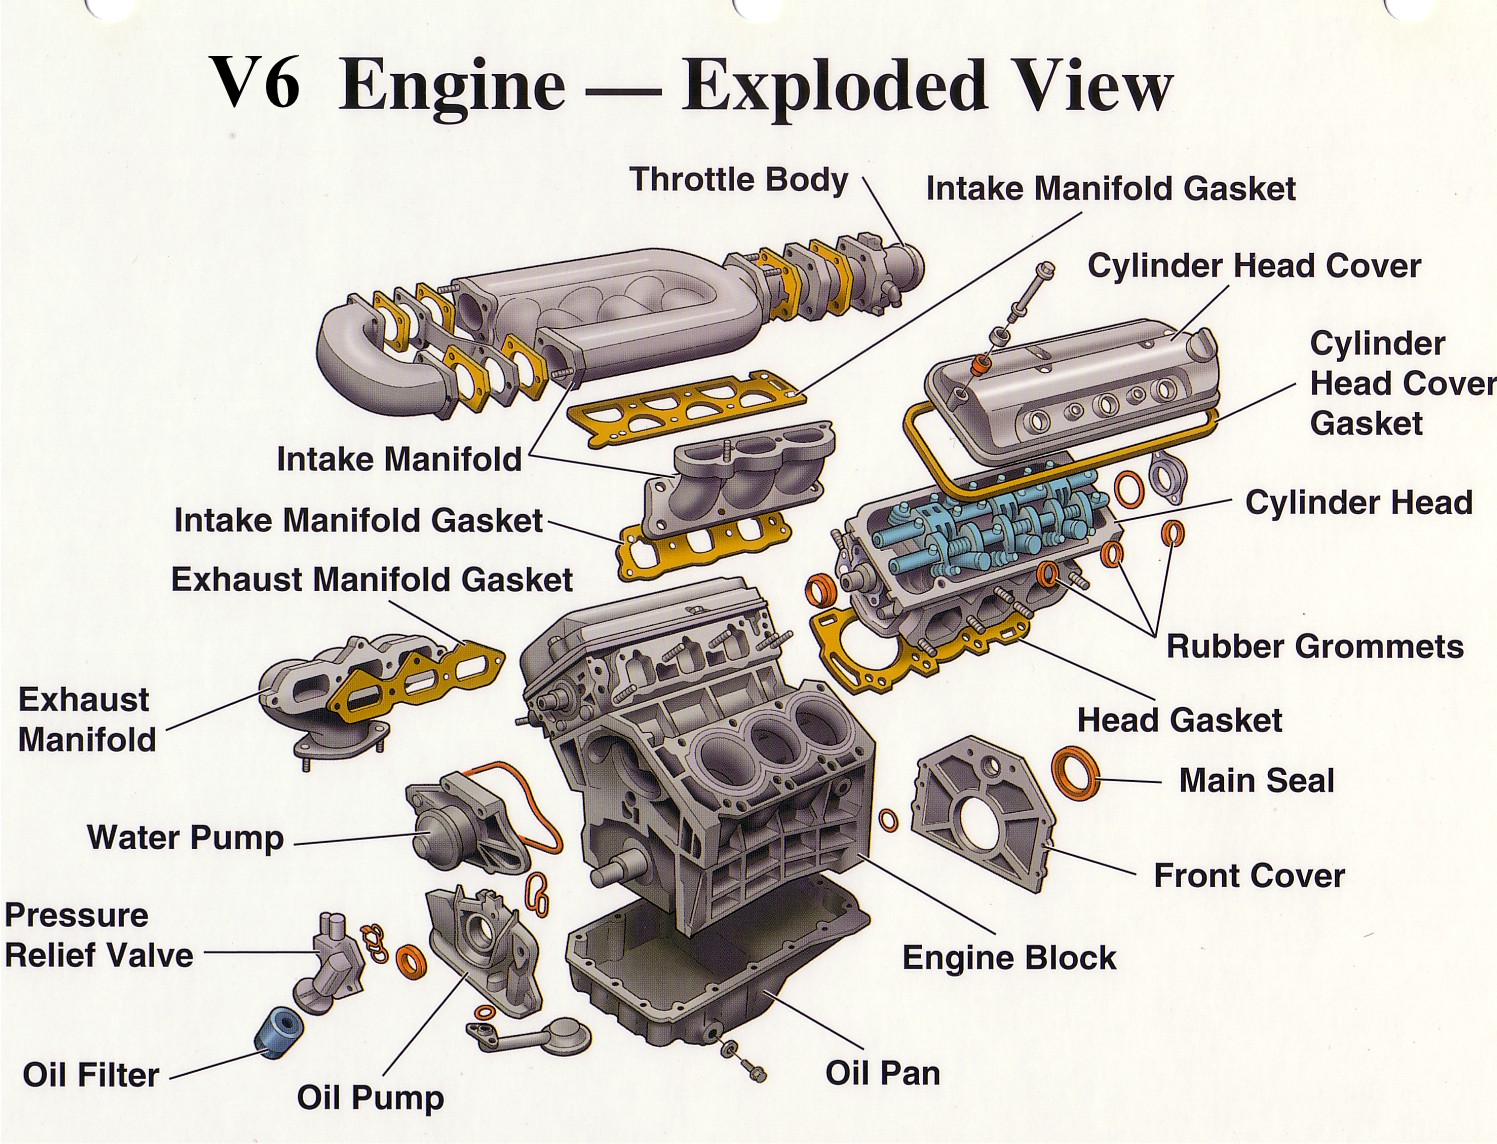 Exploded View Car Diagram